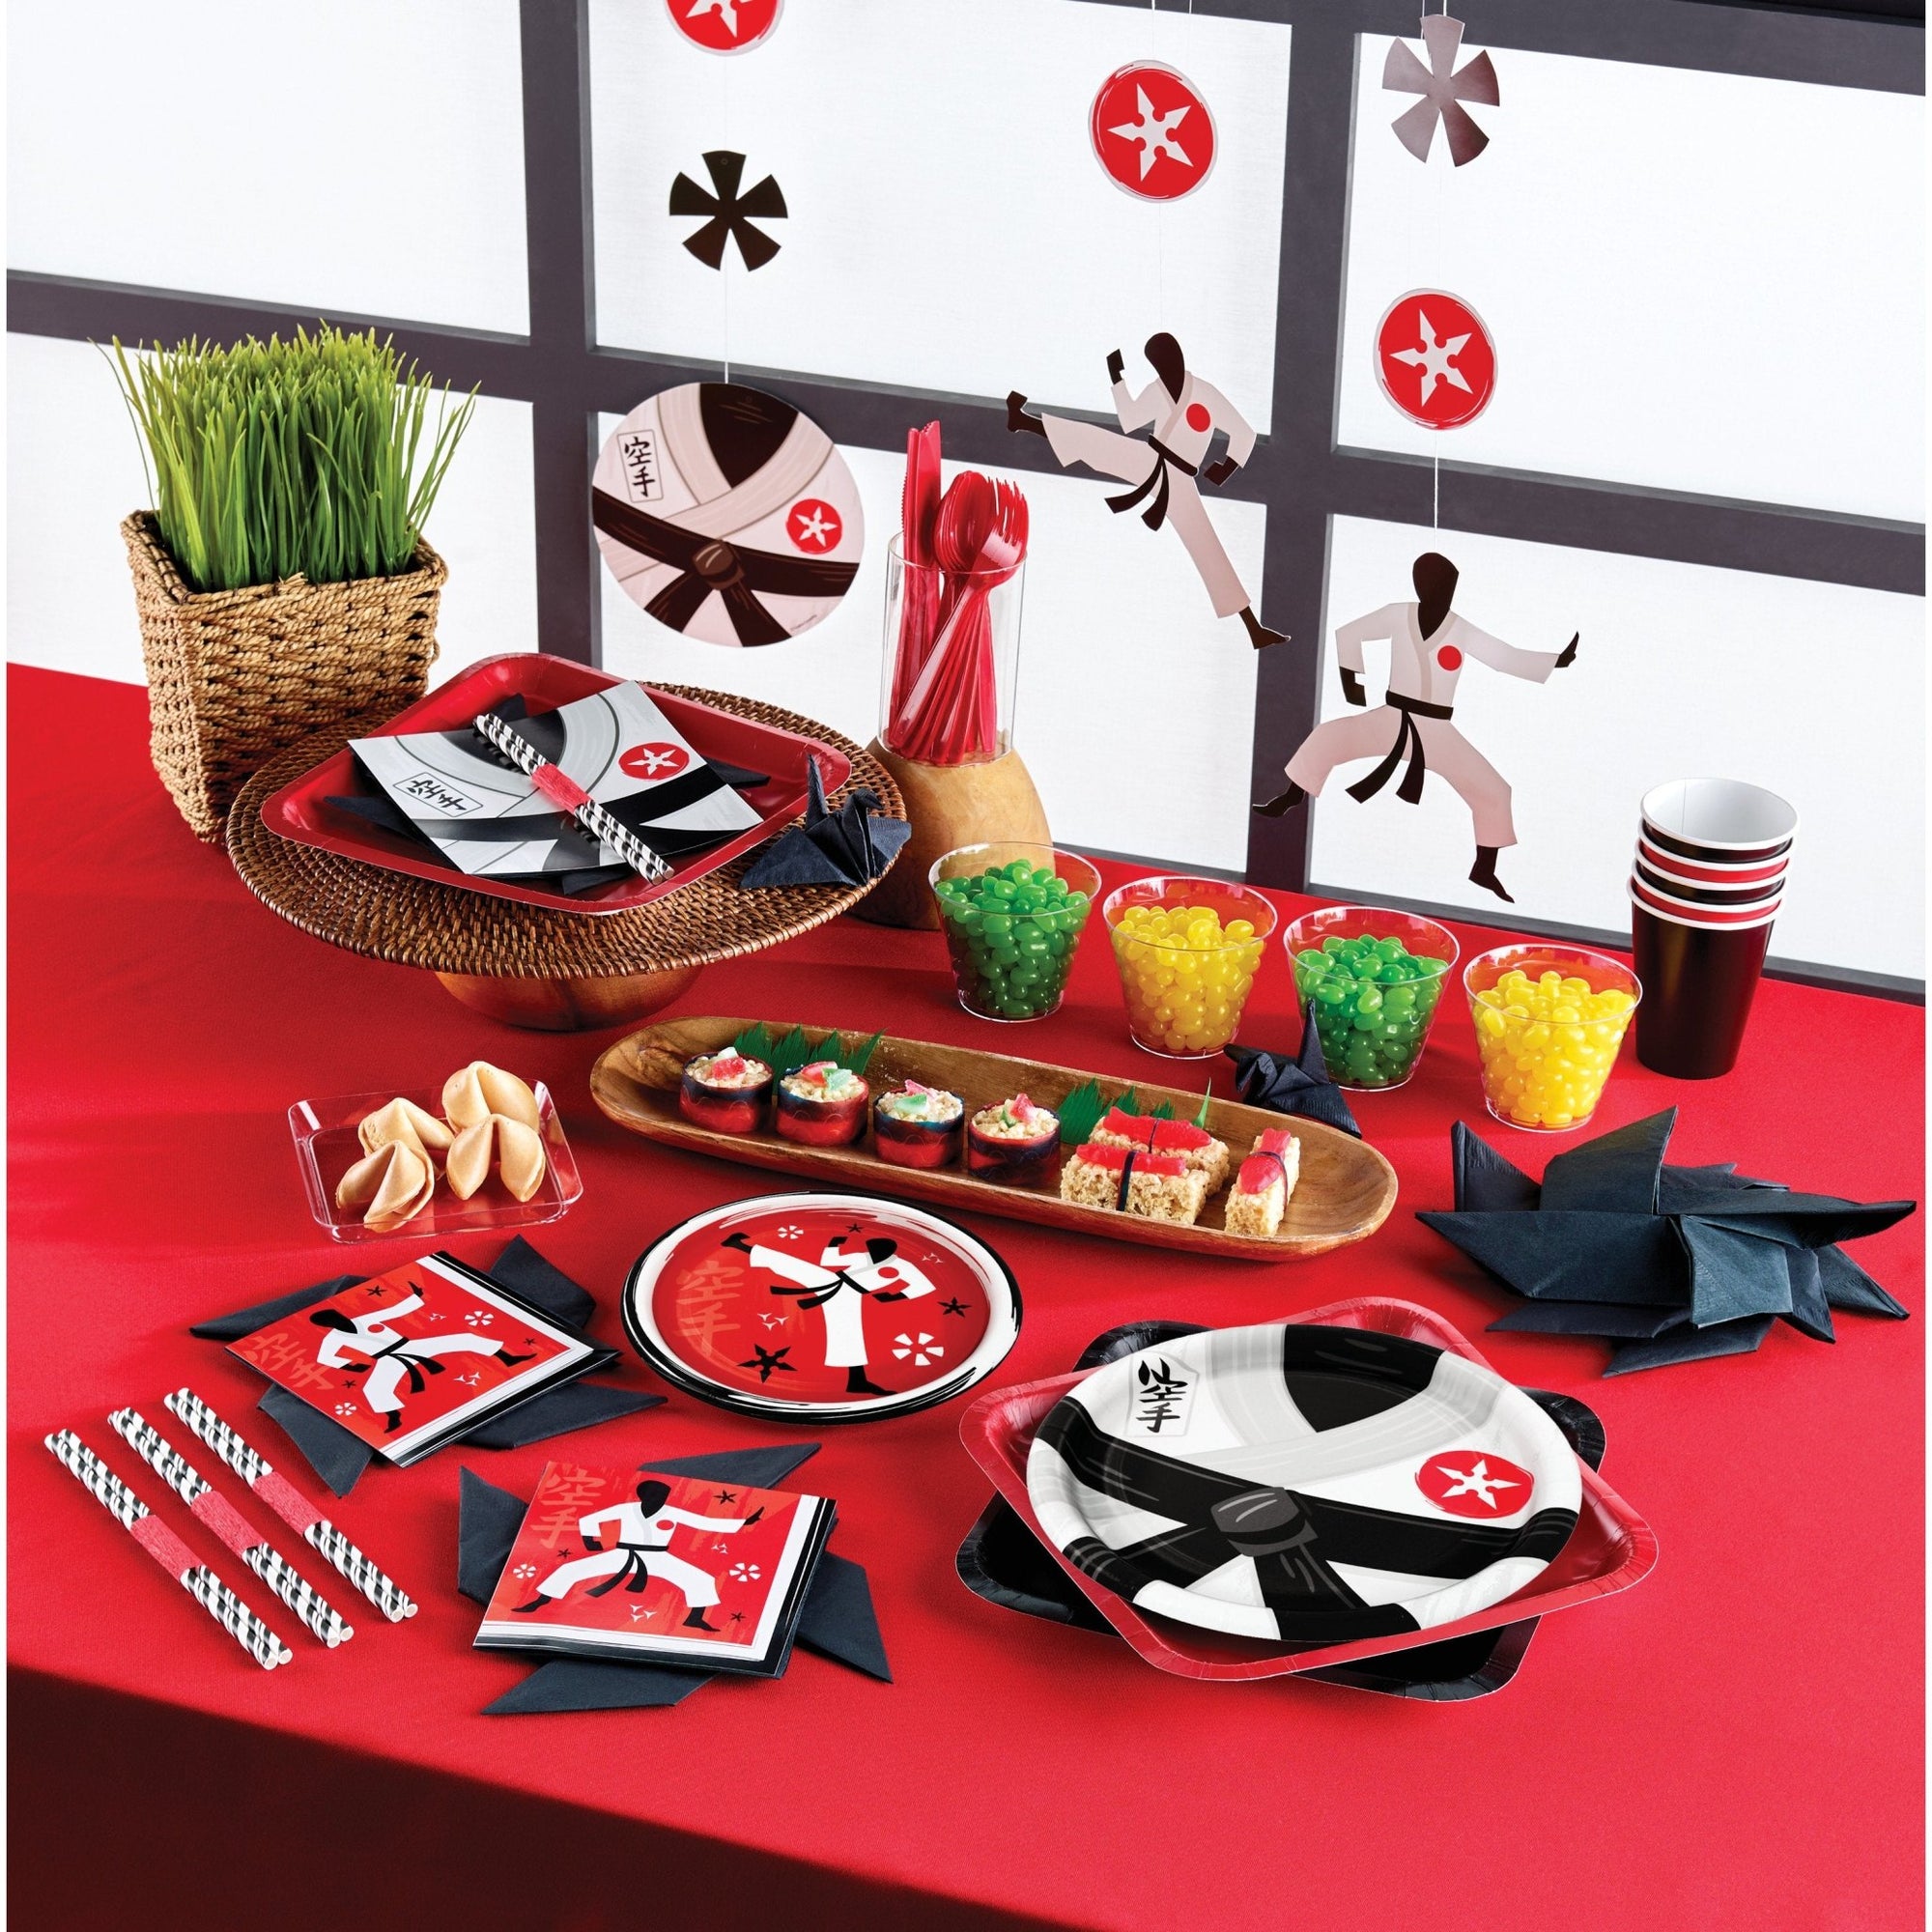 Karate Themed Party Plates - Stesha Party